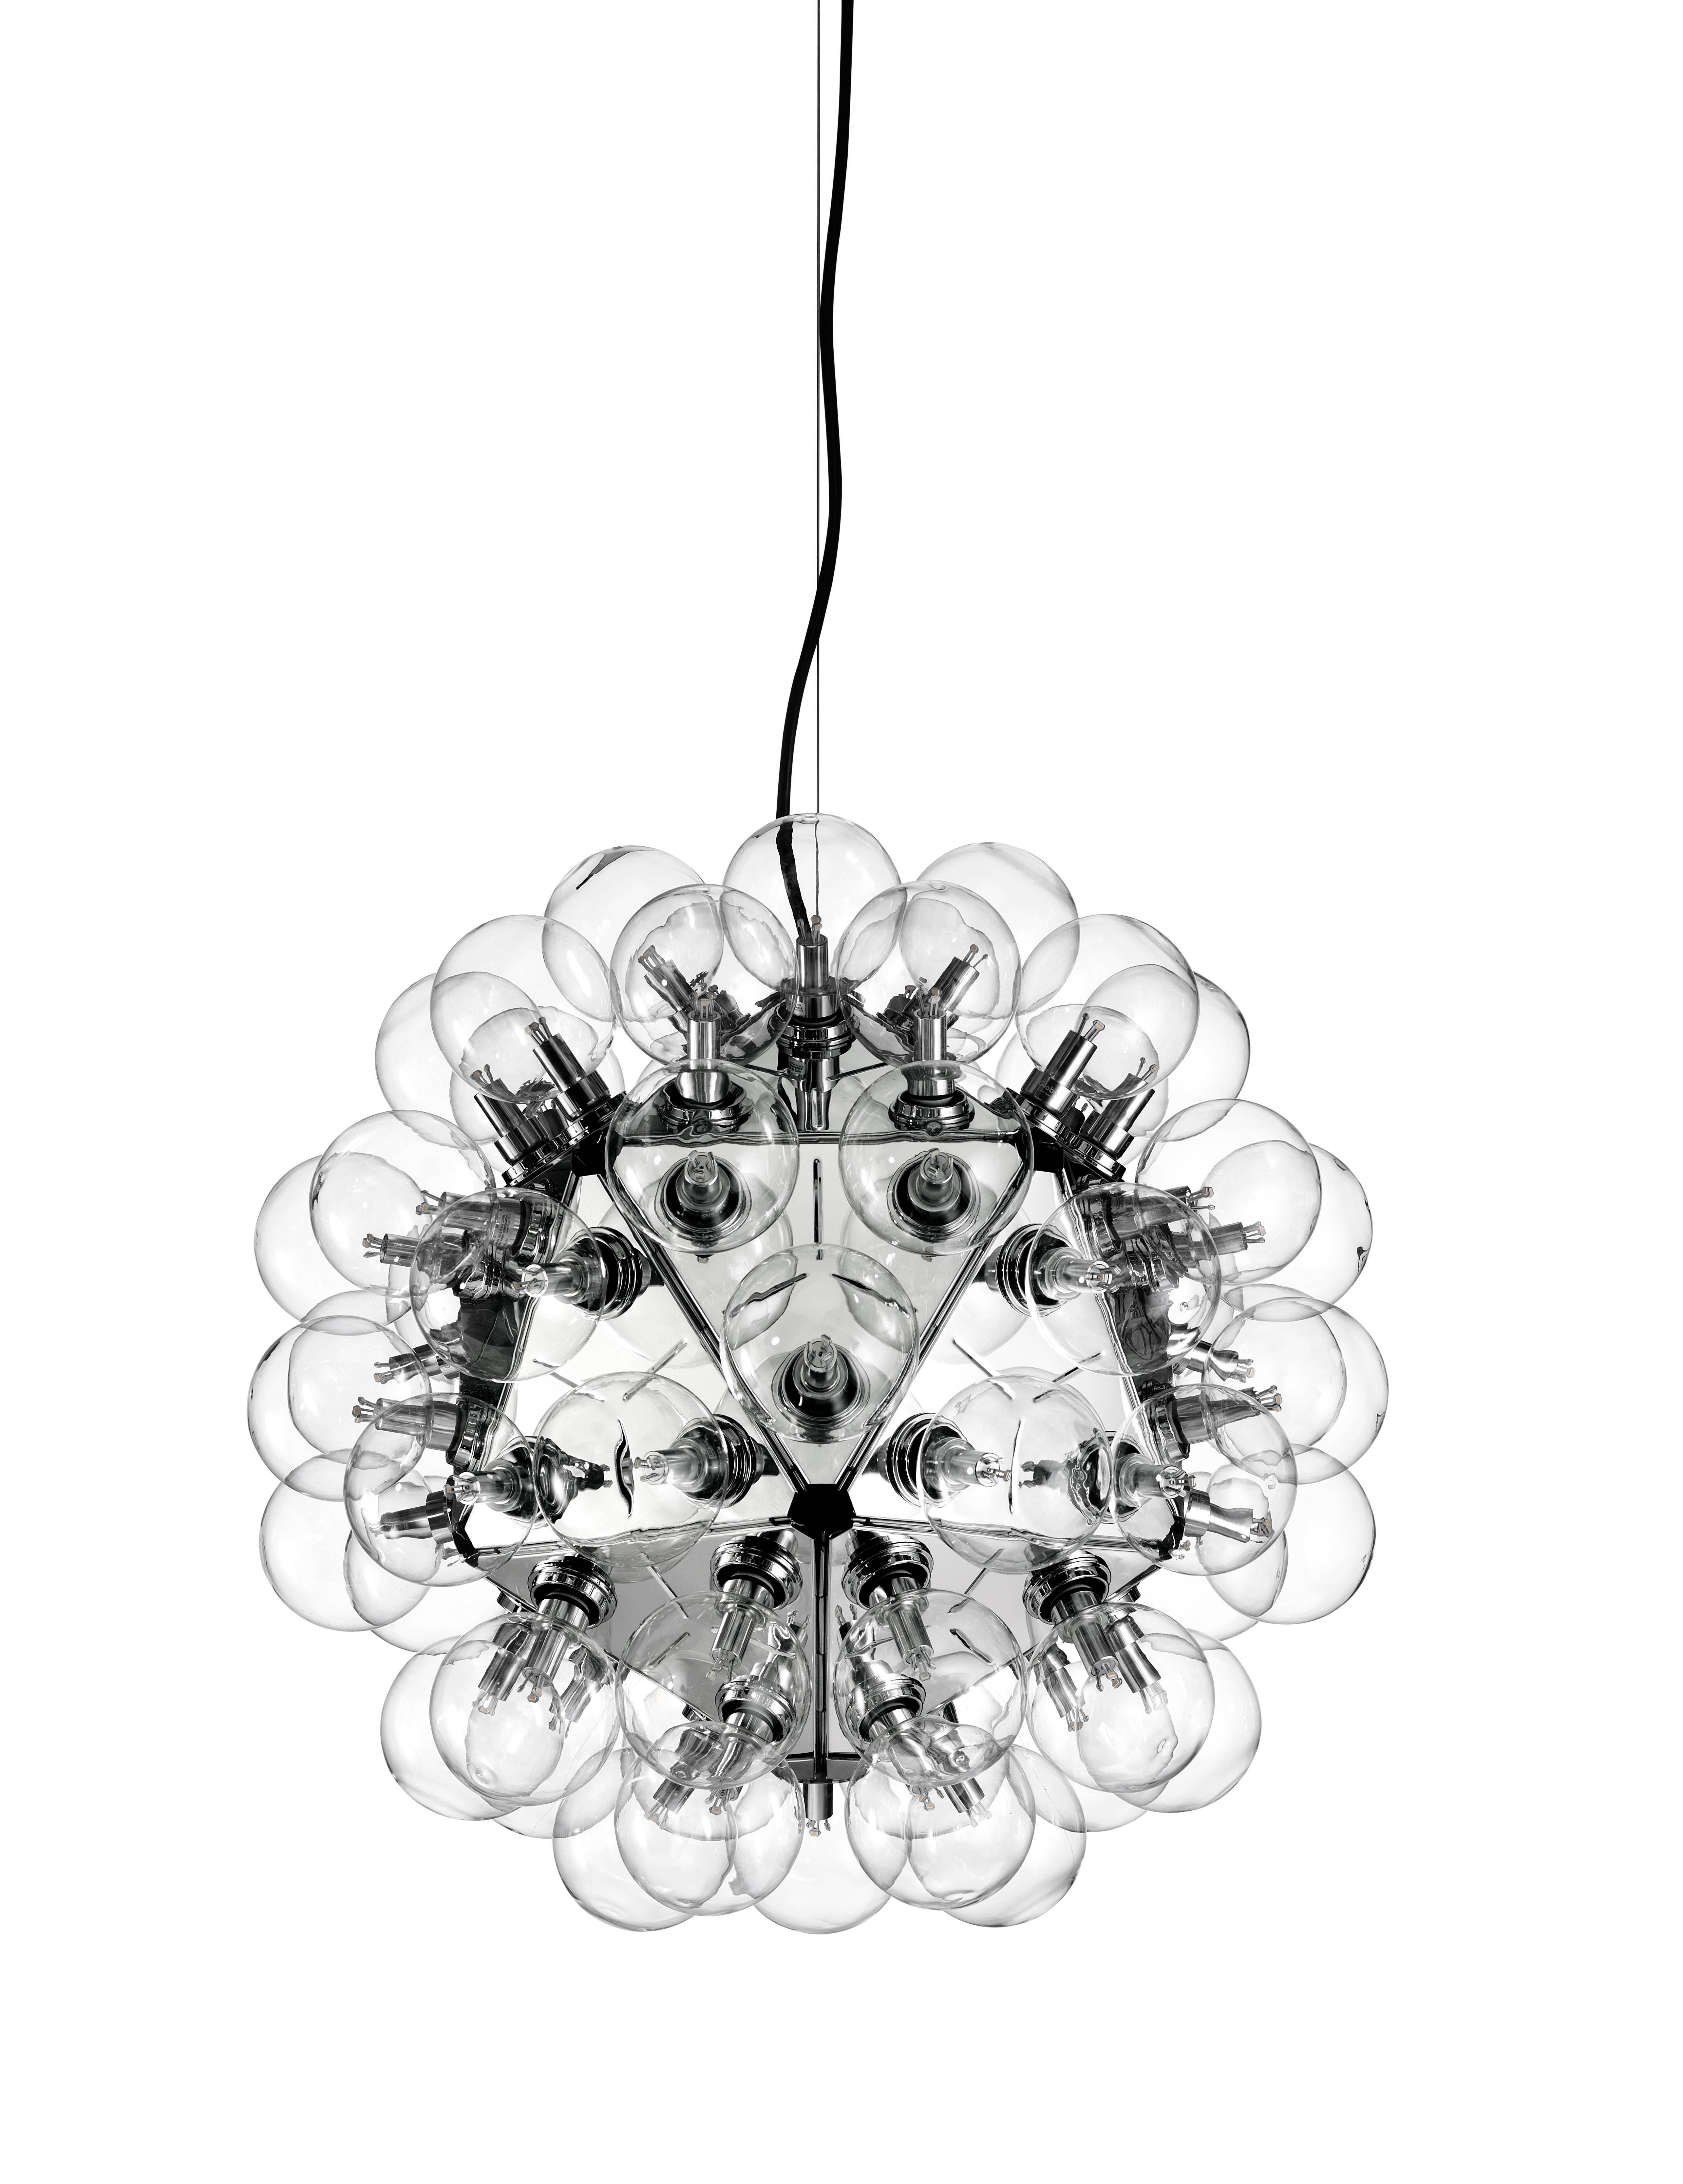 Based on the original Taraxacum created in 1960, the Taraxacum 88 reflects the iconic design’s 1988 update and includes a mixture of deep incandescent lighting and cool, polished aluminum triangles.

Designed by master Achille Castiglioni, this